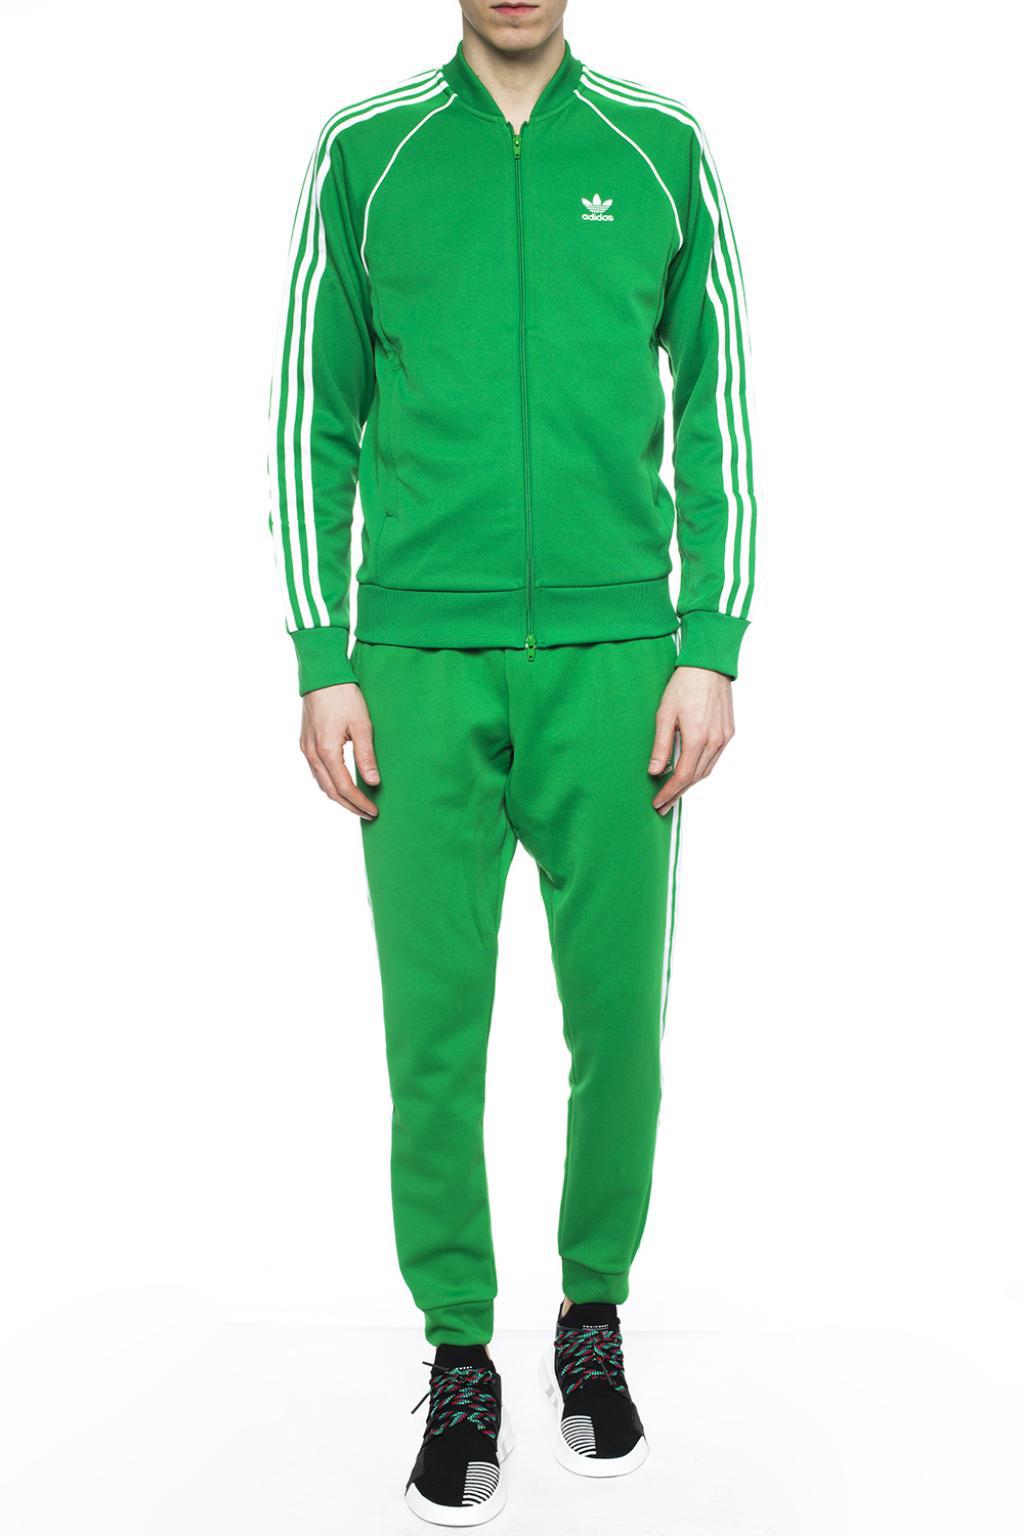 adidas Cotton Logo Sweatpants in Green for Men - Lyst